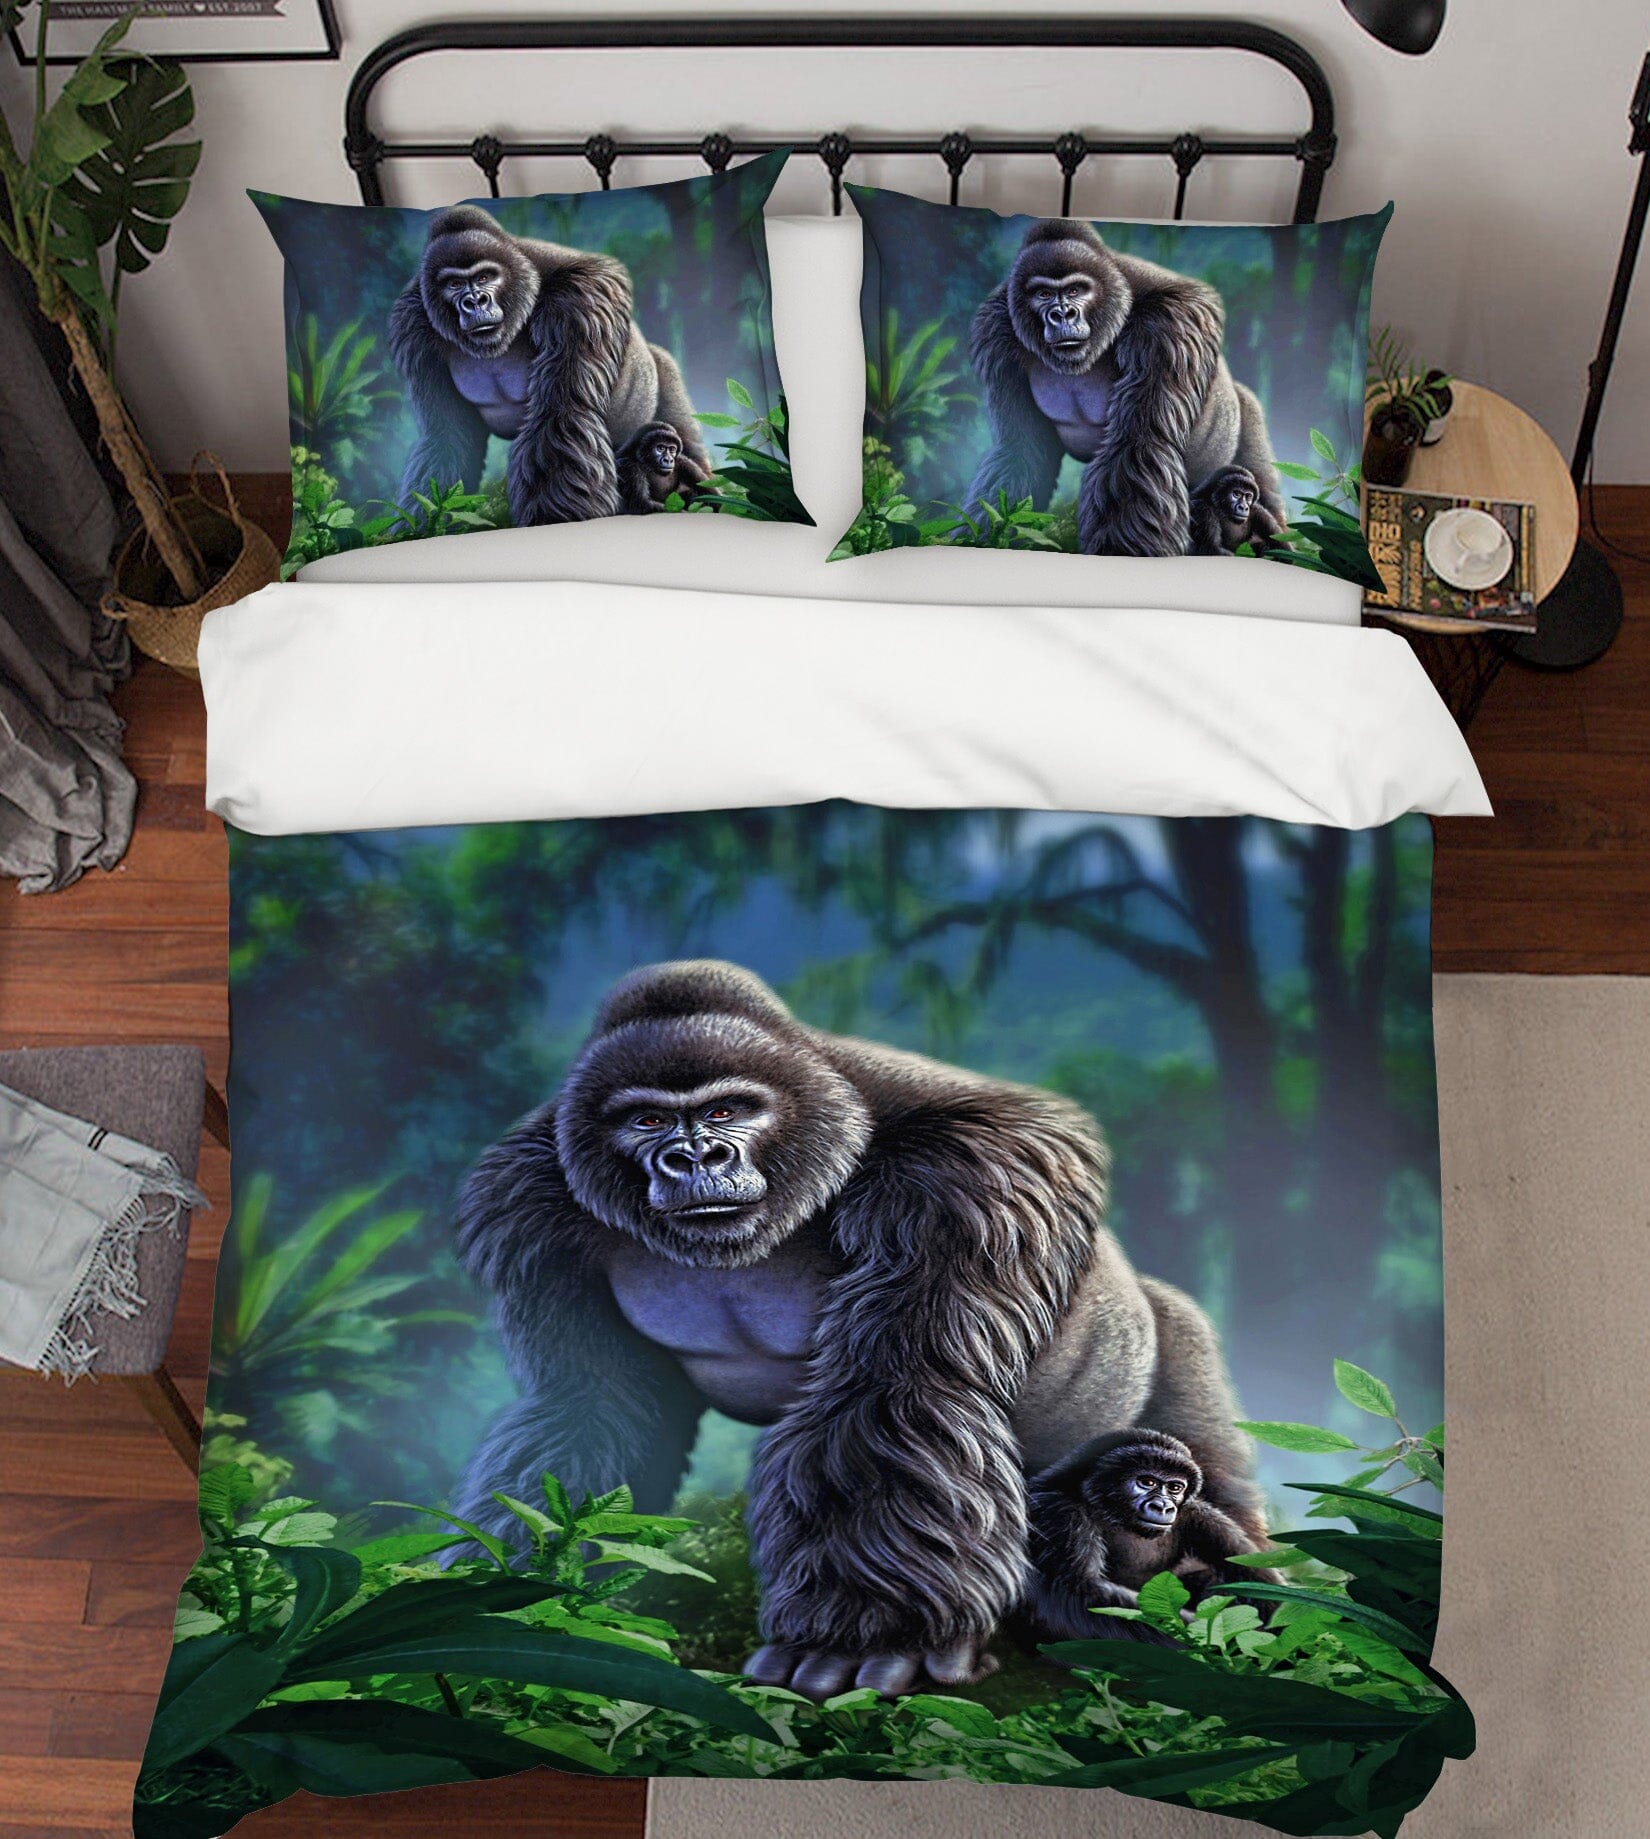 3D Guardian 2124 Jerry LoFaro bedding Bed Pillowcases Quilt Quiet Covers AJ Creativity Home 